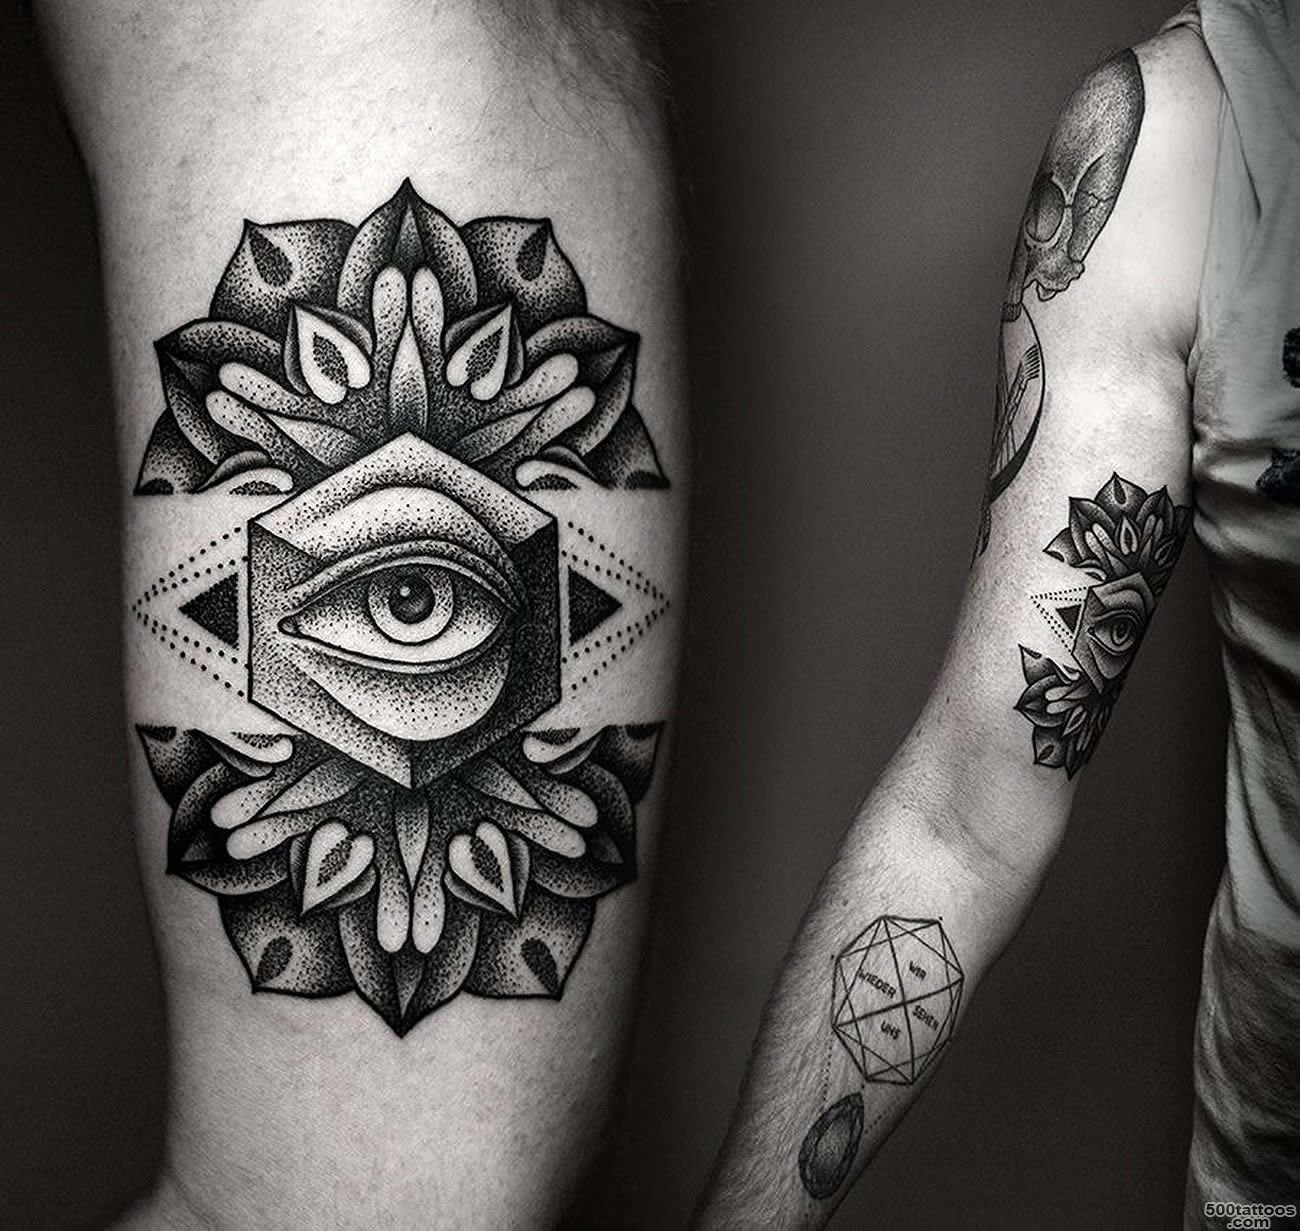 Top Rod Slavic Images for Pinterest Tattoos_49